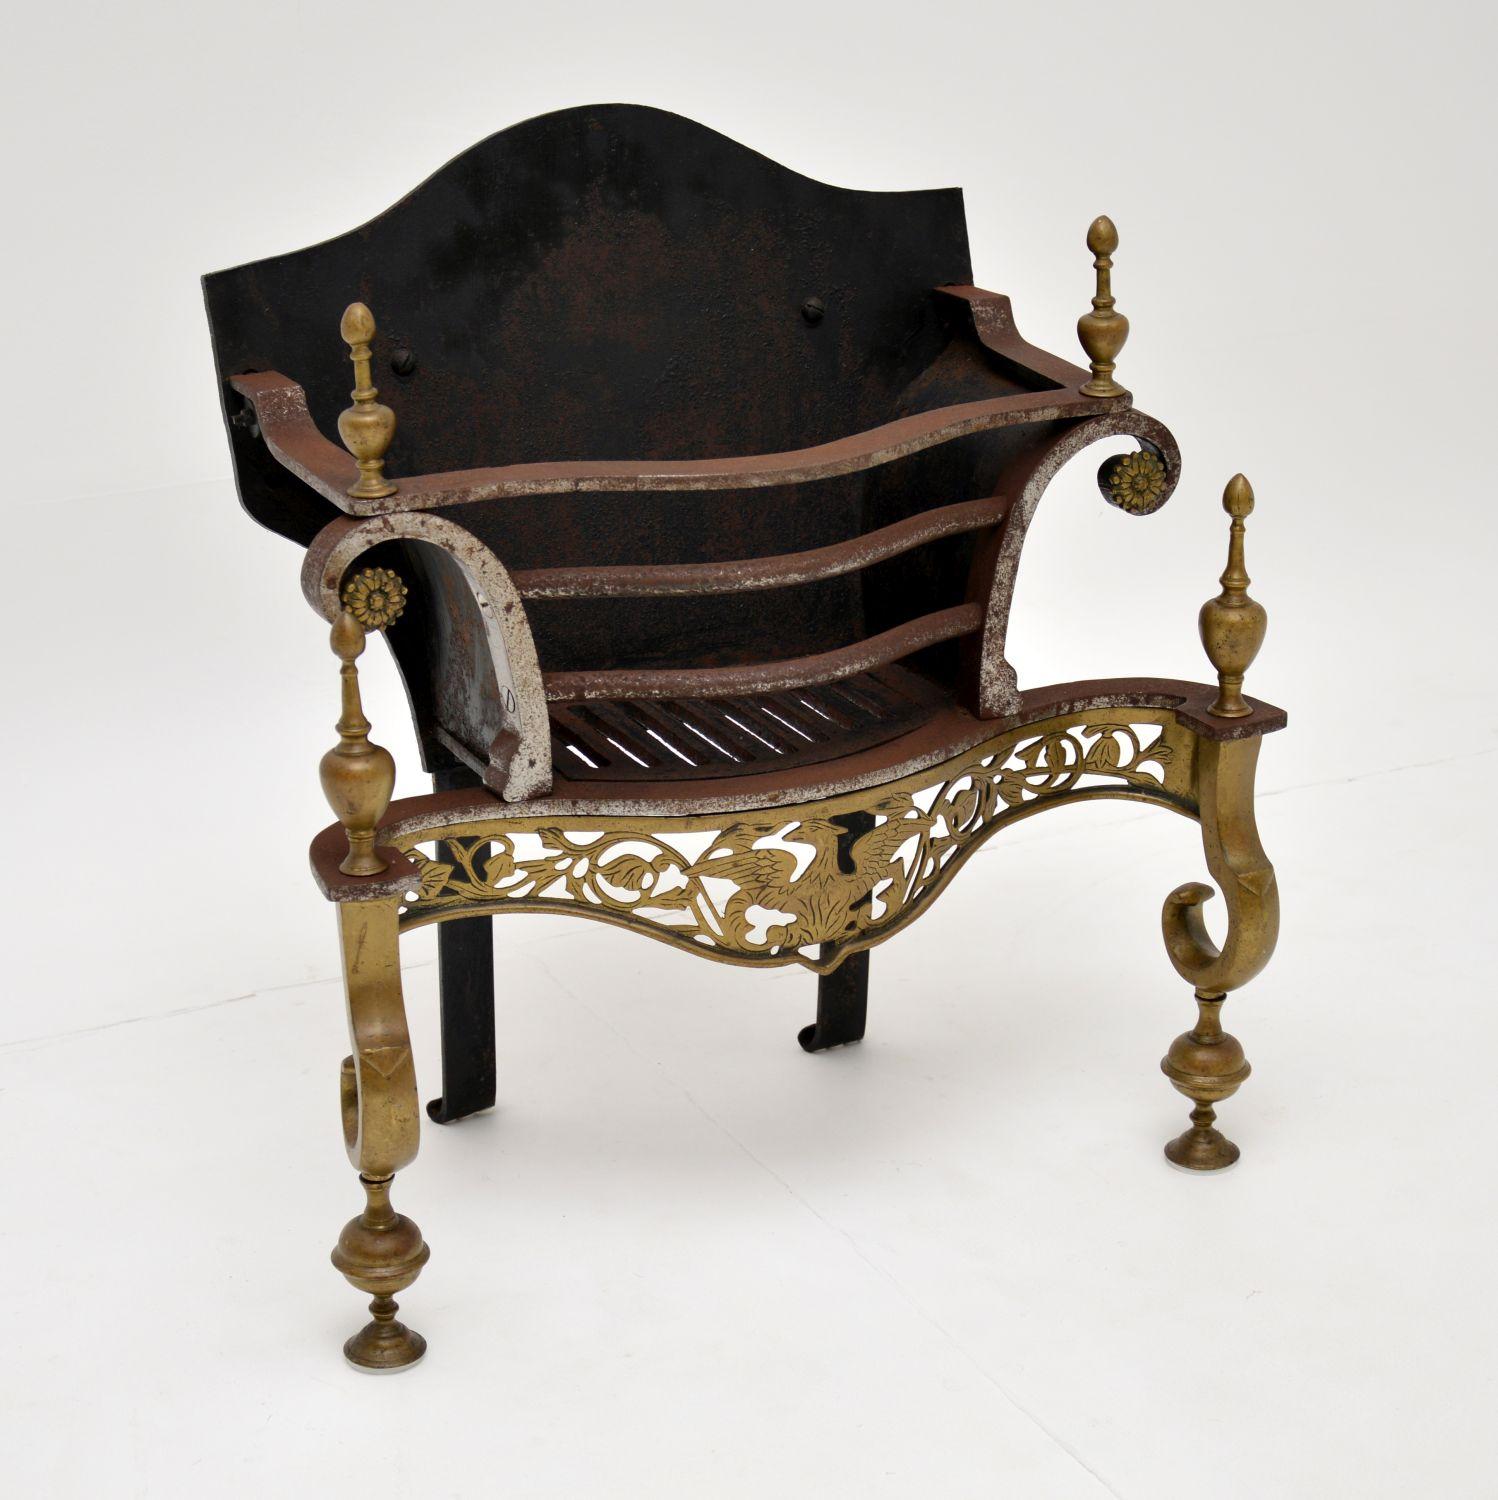 A charming antique fireplace basket, made from steel, iron and brass. This dates from the early twentieth century, probably 1920s and is very much George II in style.

It is of great quality and is ornately decorated in the neoclassical style.